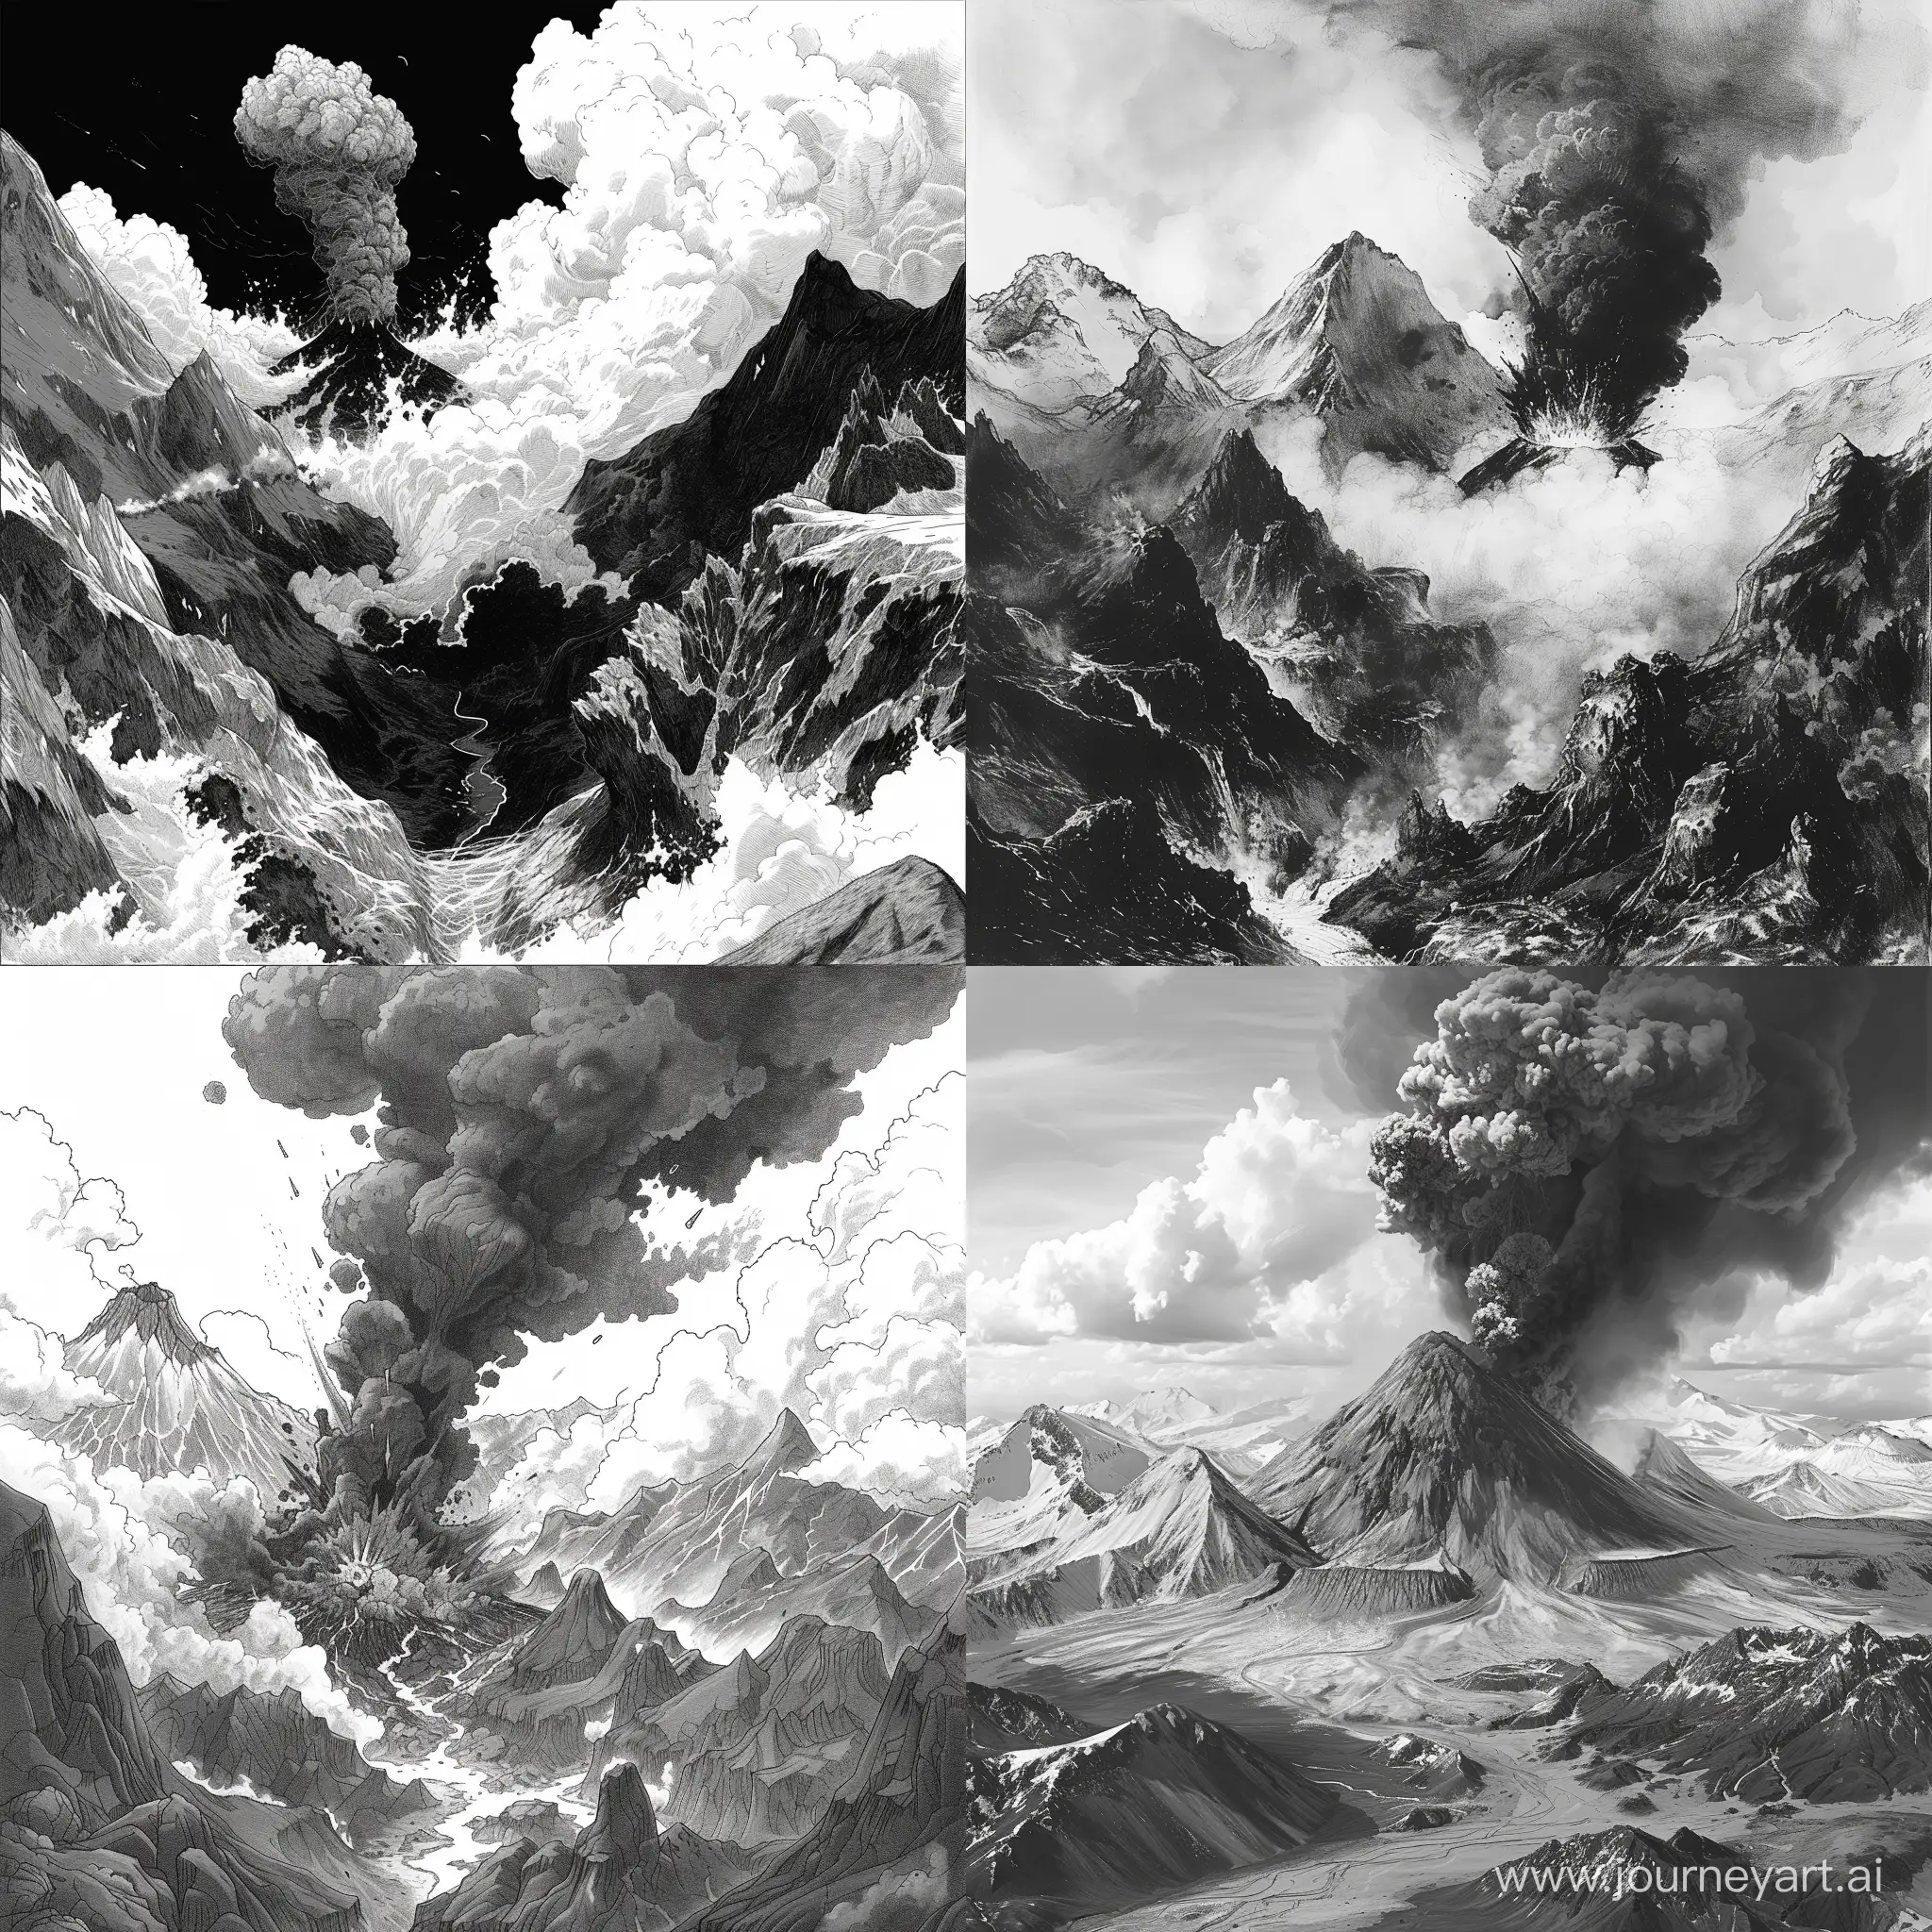 Volcanic-Eruption-in-Mountain-Range-Dramatic-Black-and-White-Sketch